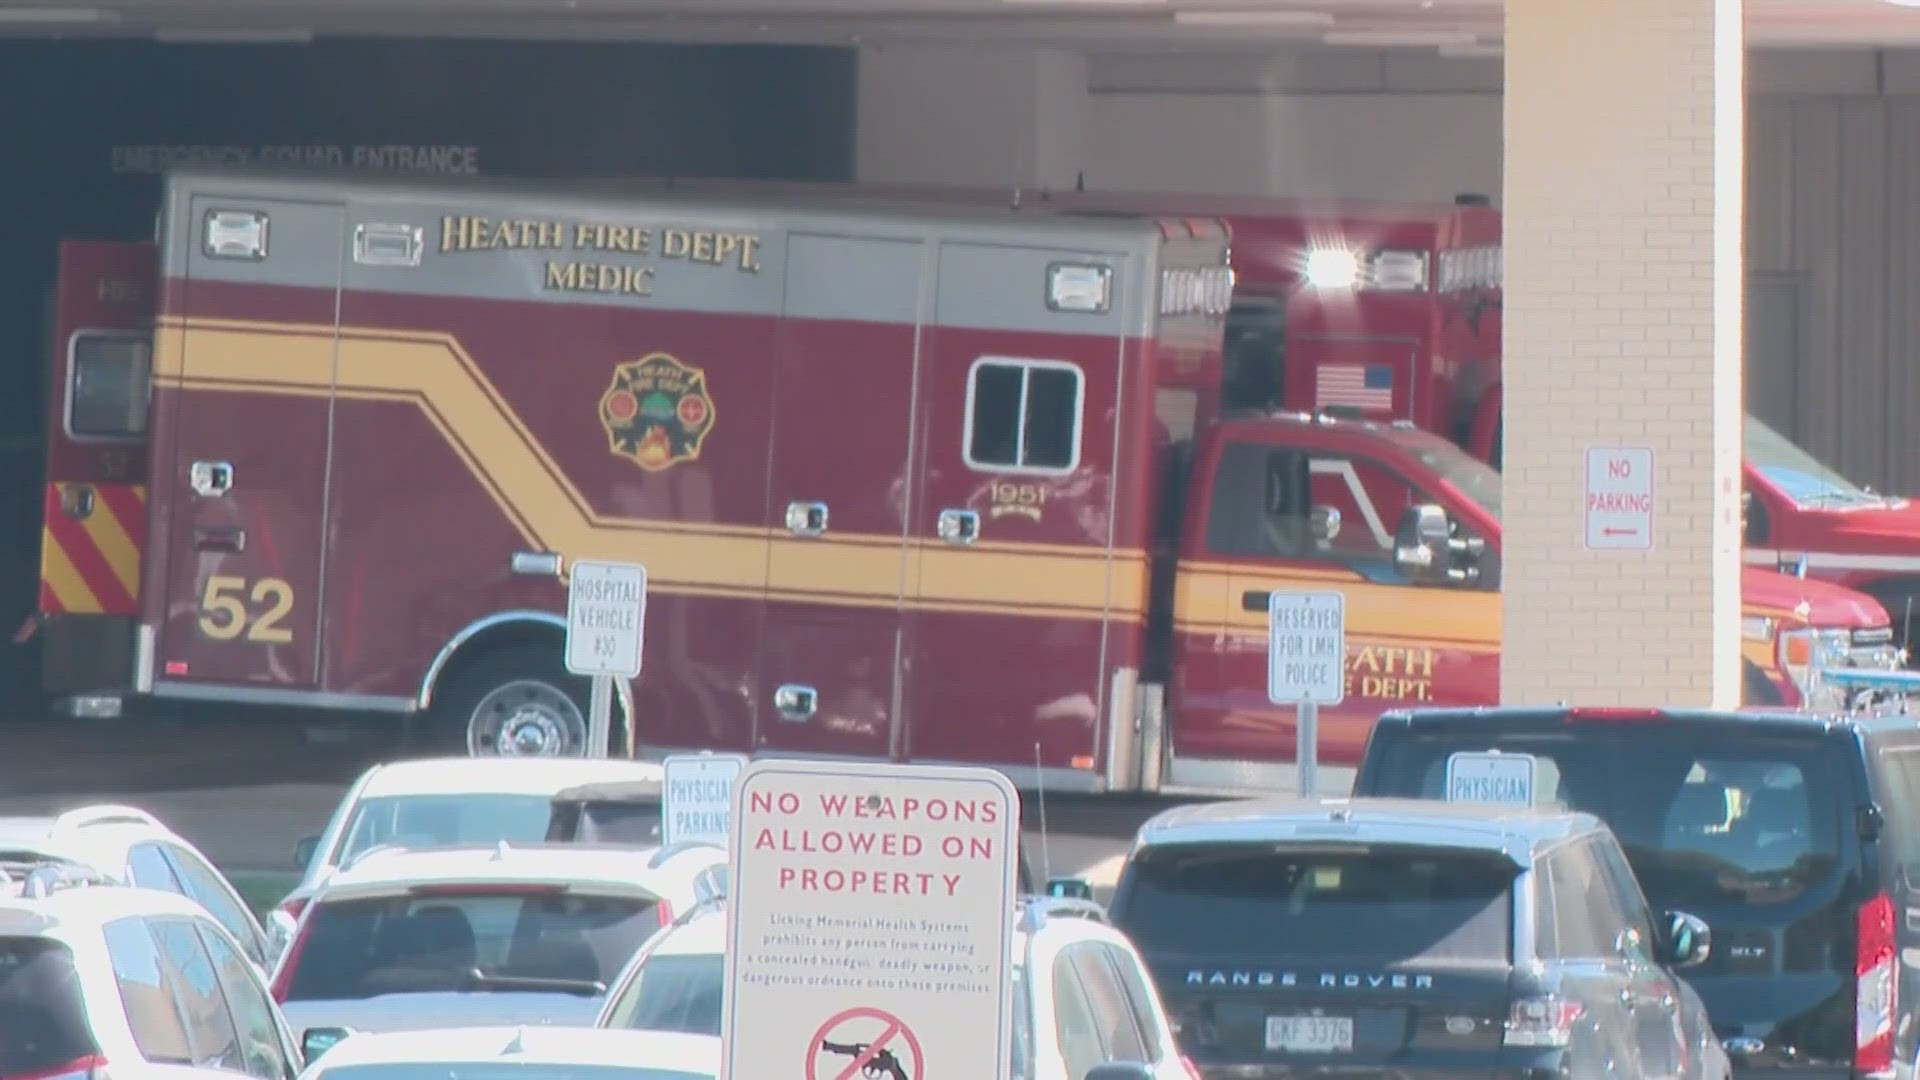 Authorities said 45 people, including 43 students and two adults, were taken to Licking Memorial Hospital for treatment and there are no life-threatening injuries.